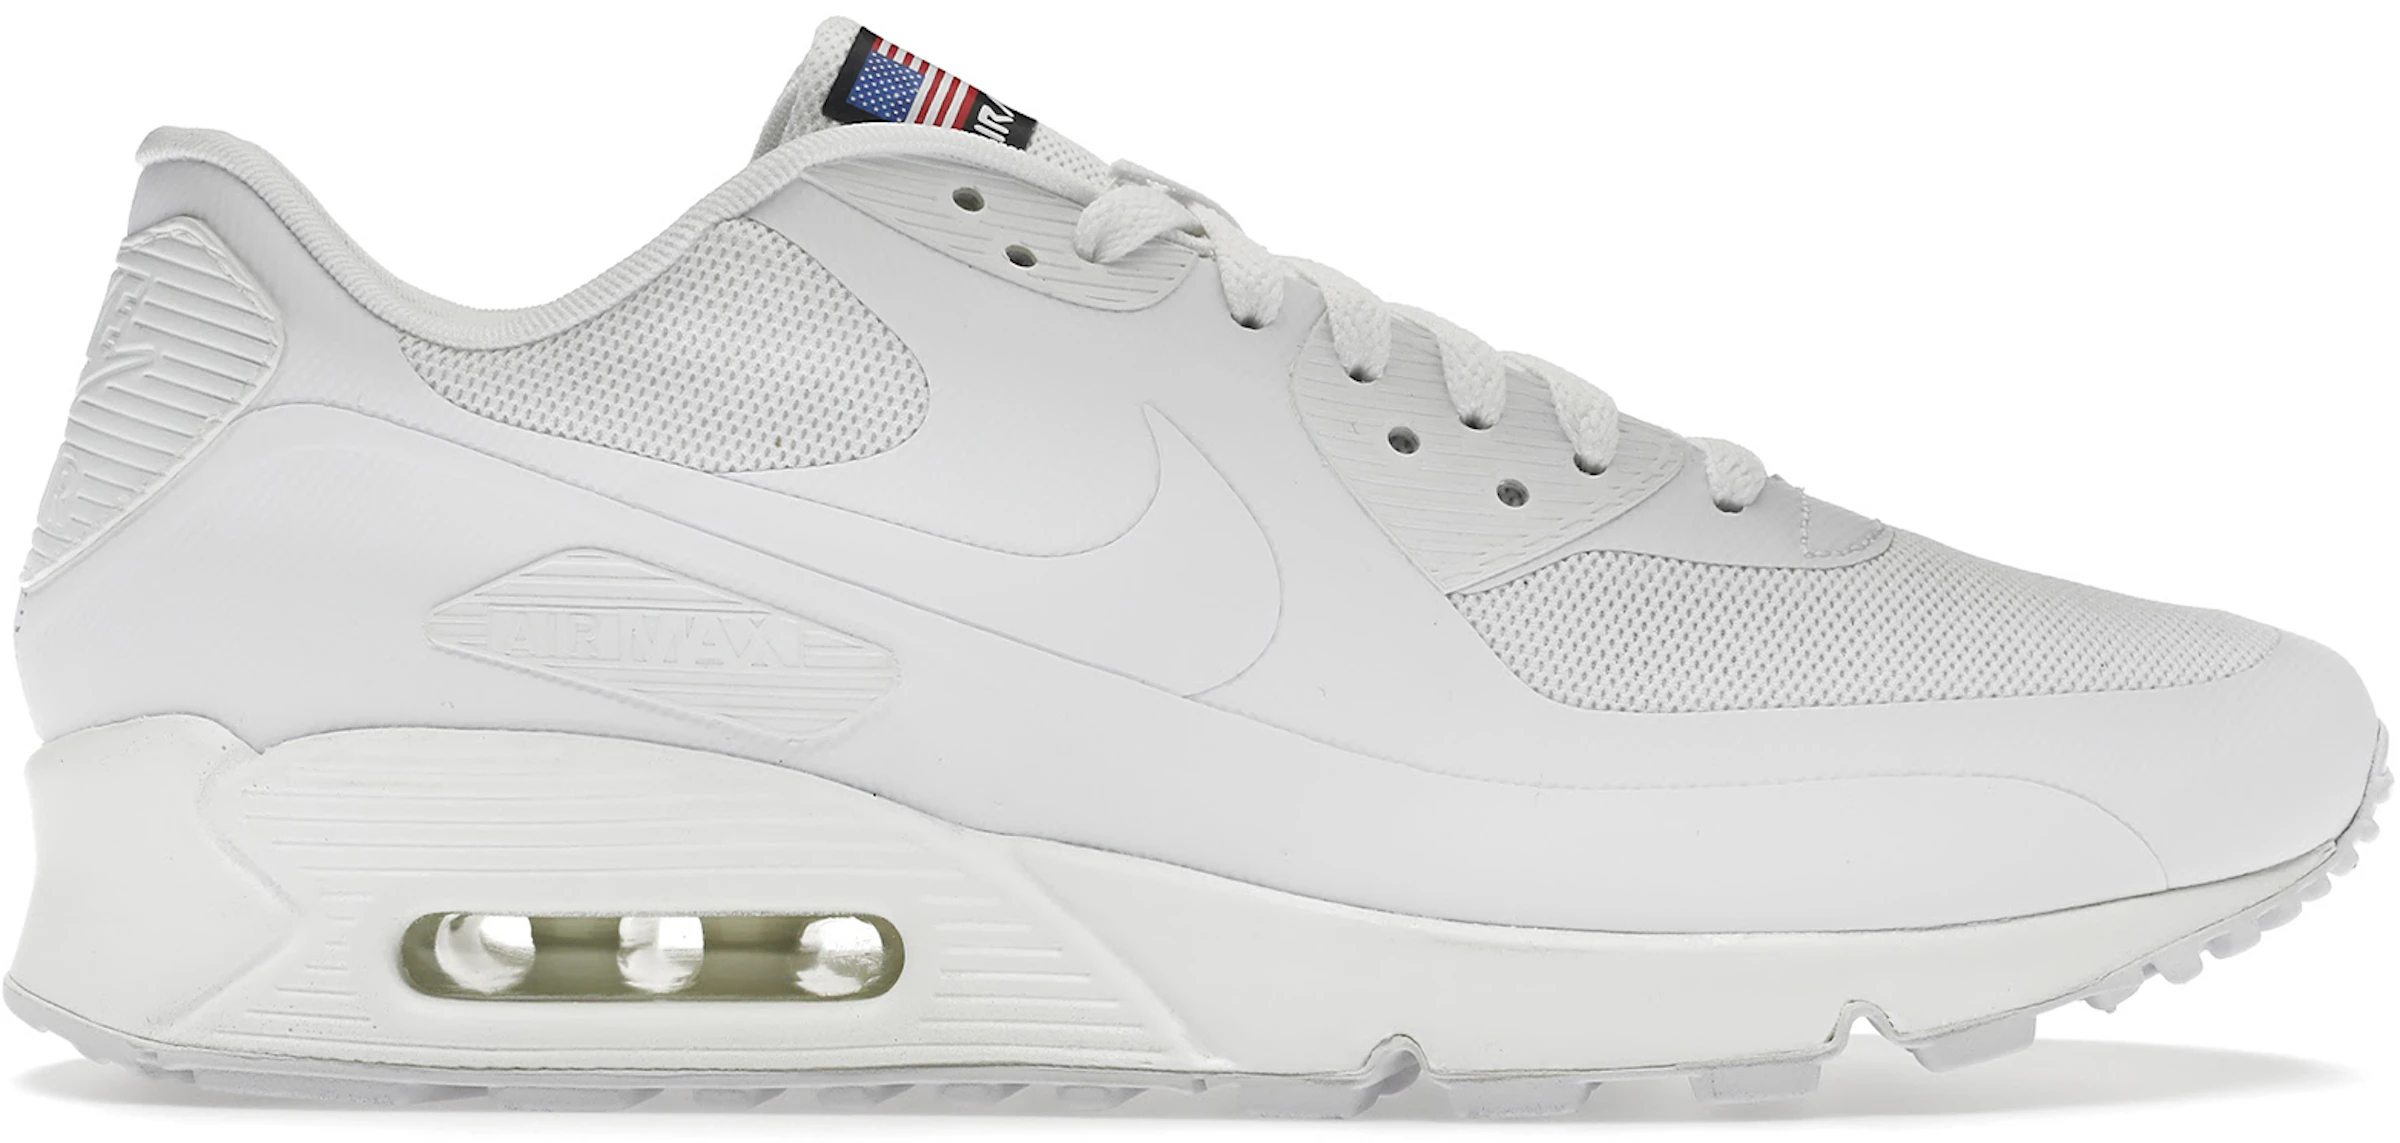 Nike Max 90 Hyperfuse Independence Day - 613841-110 -